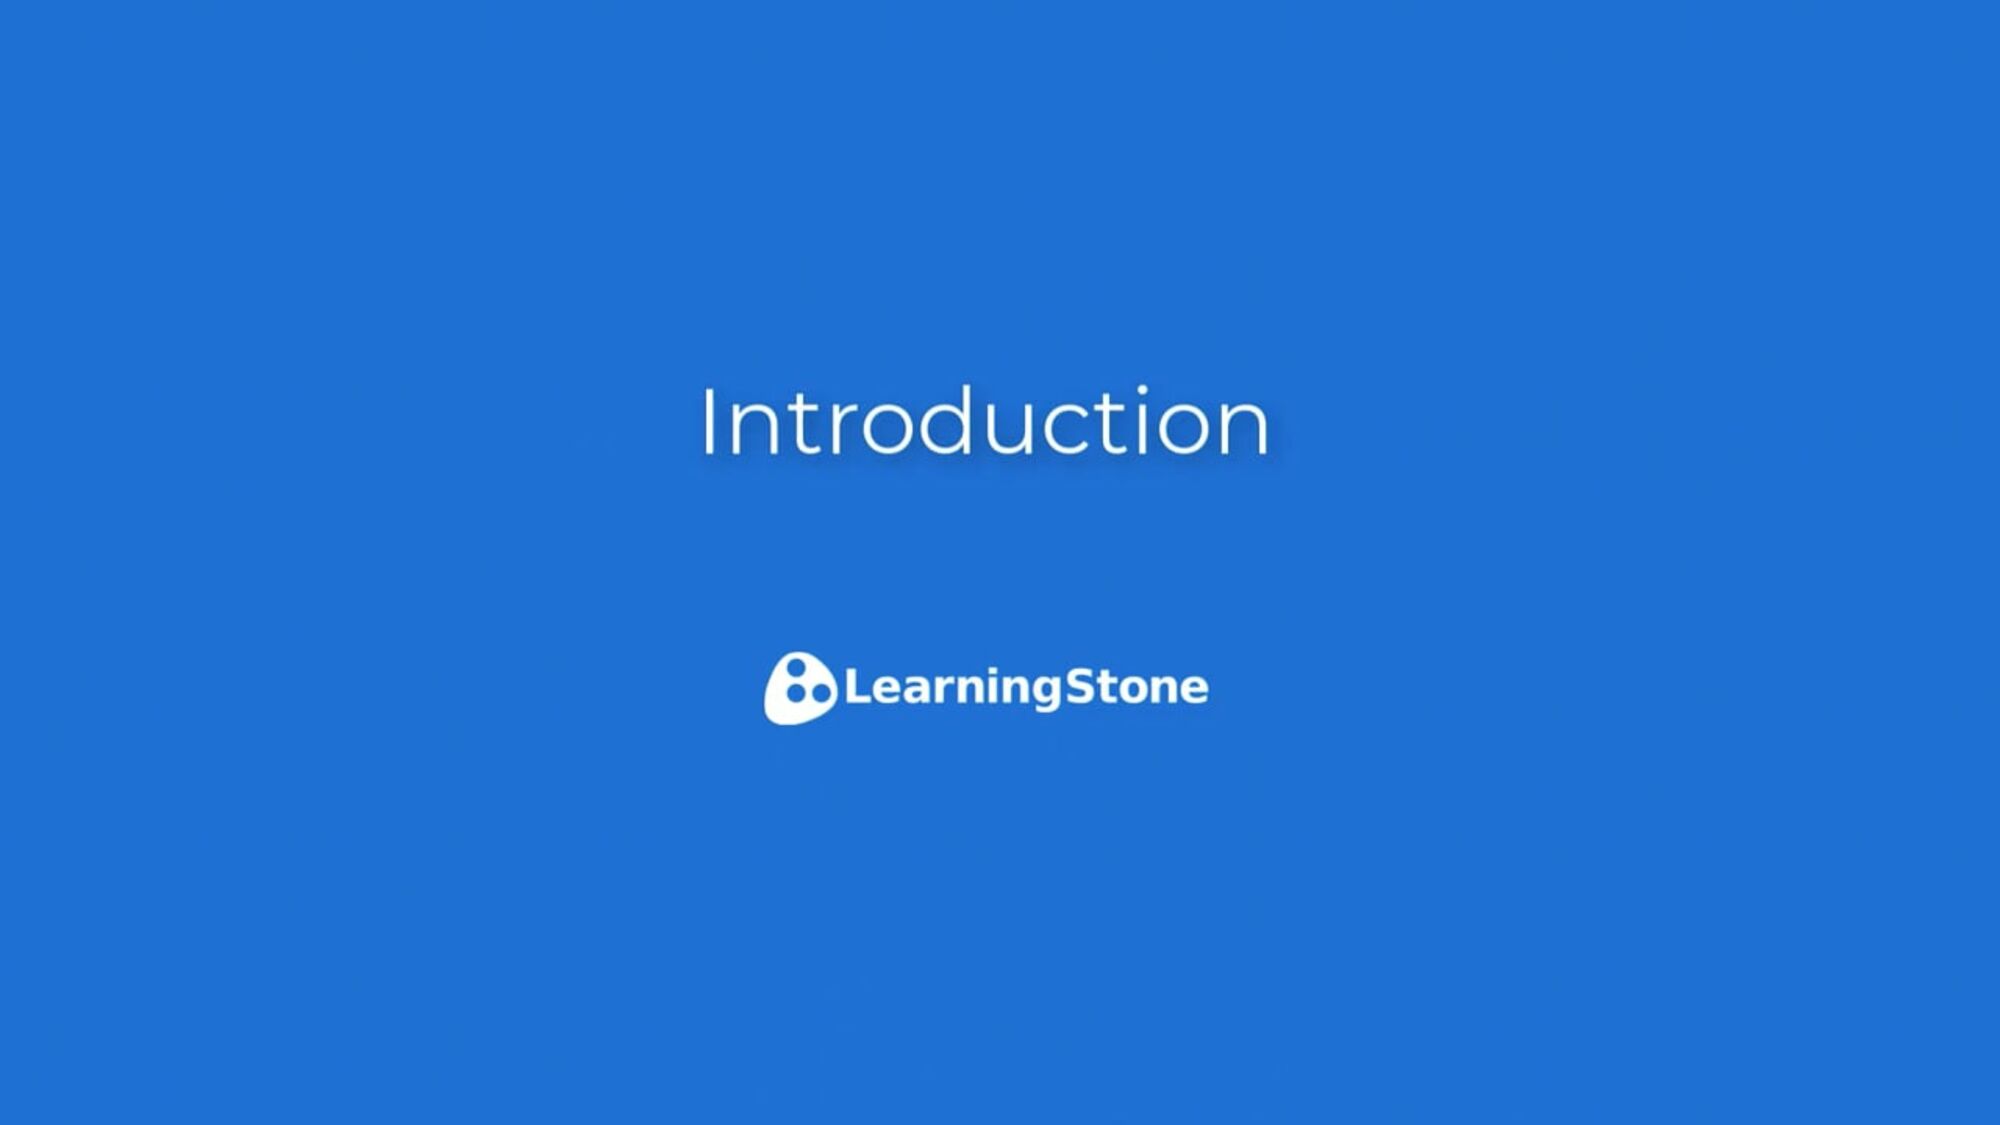 12 LearningStone Introduction